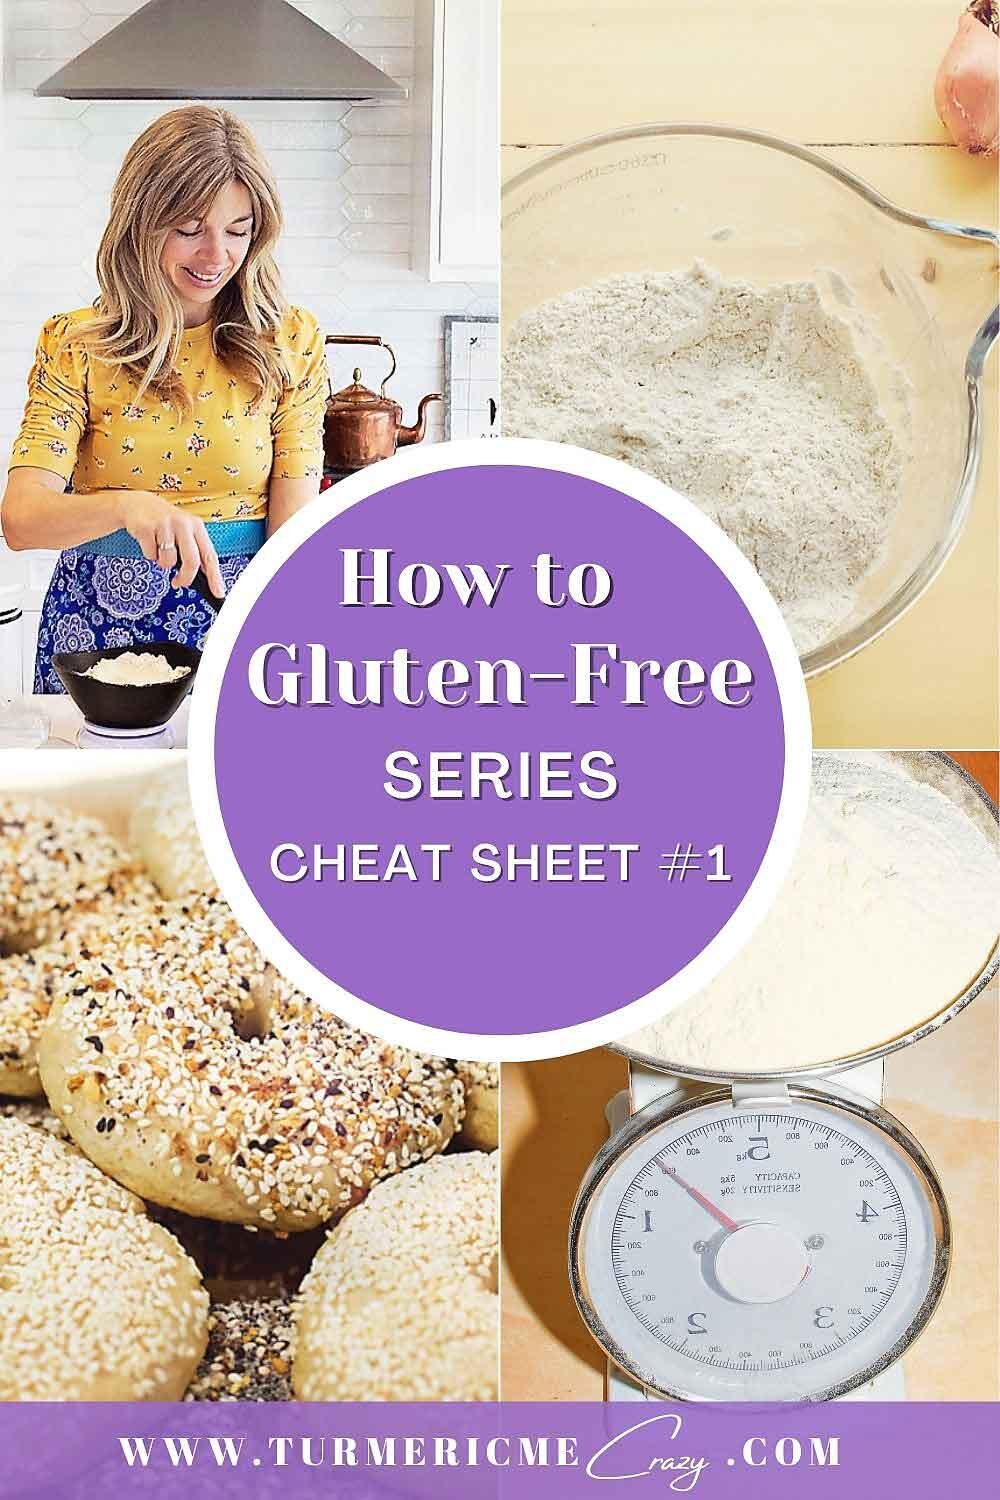 How to make any recipe gluten free! Find out when and how you can swap wheat flours for gluten free flours in a one to one ratio. how to go gluten free, gluten free recipes, make a recipe gluten free